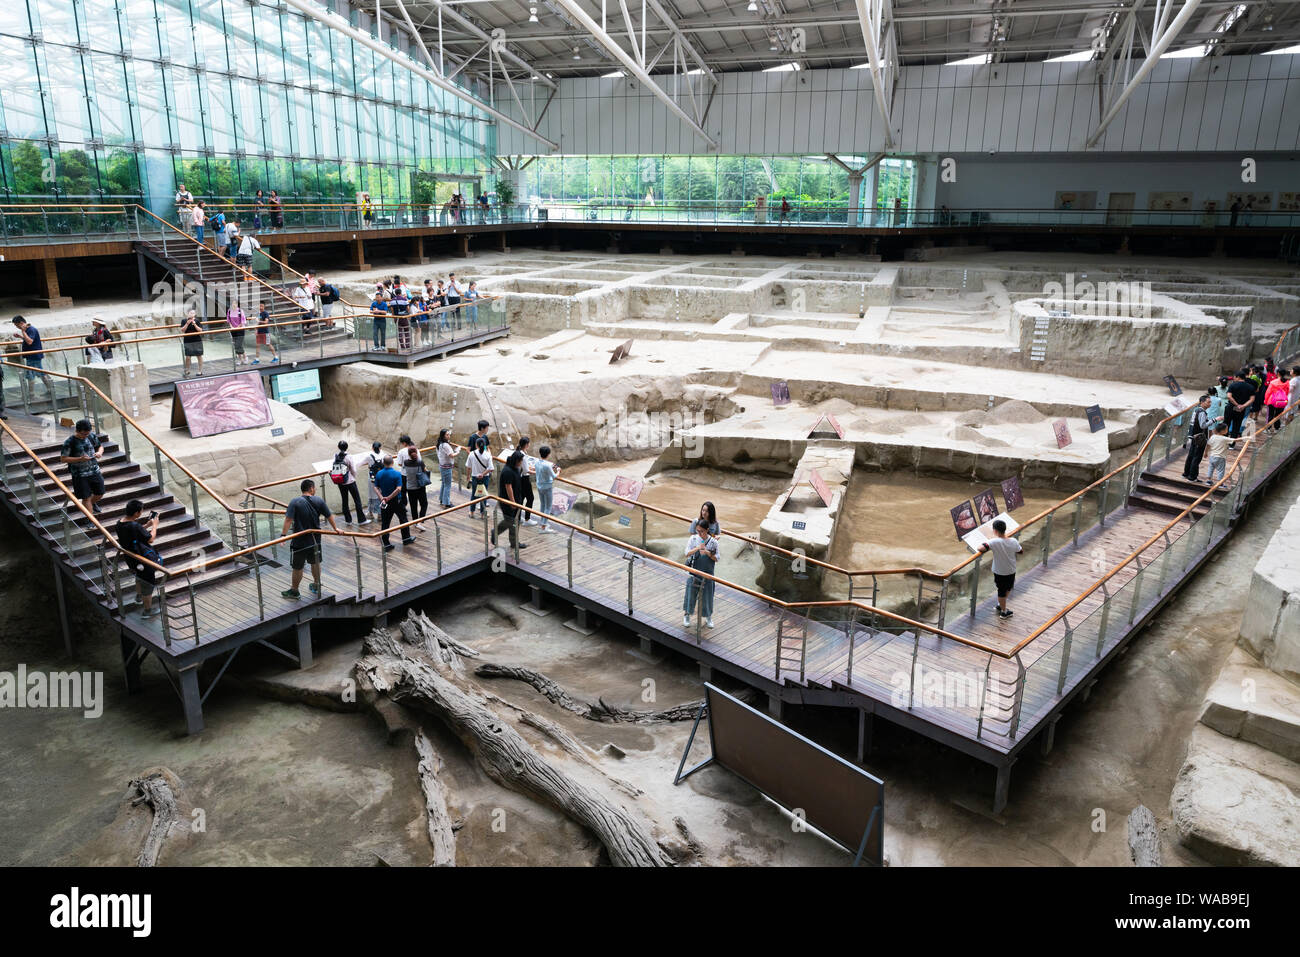 Chengdu China, 6 August 2019 : Interior of Jinsha site museum with view of the archaeological excavation site in Chengdu Sichuan China Stock Photo